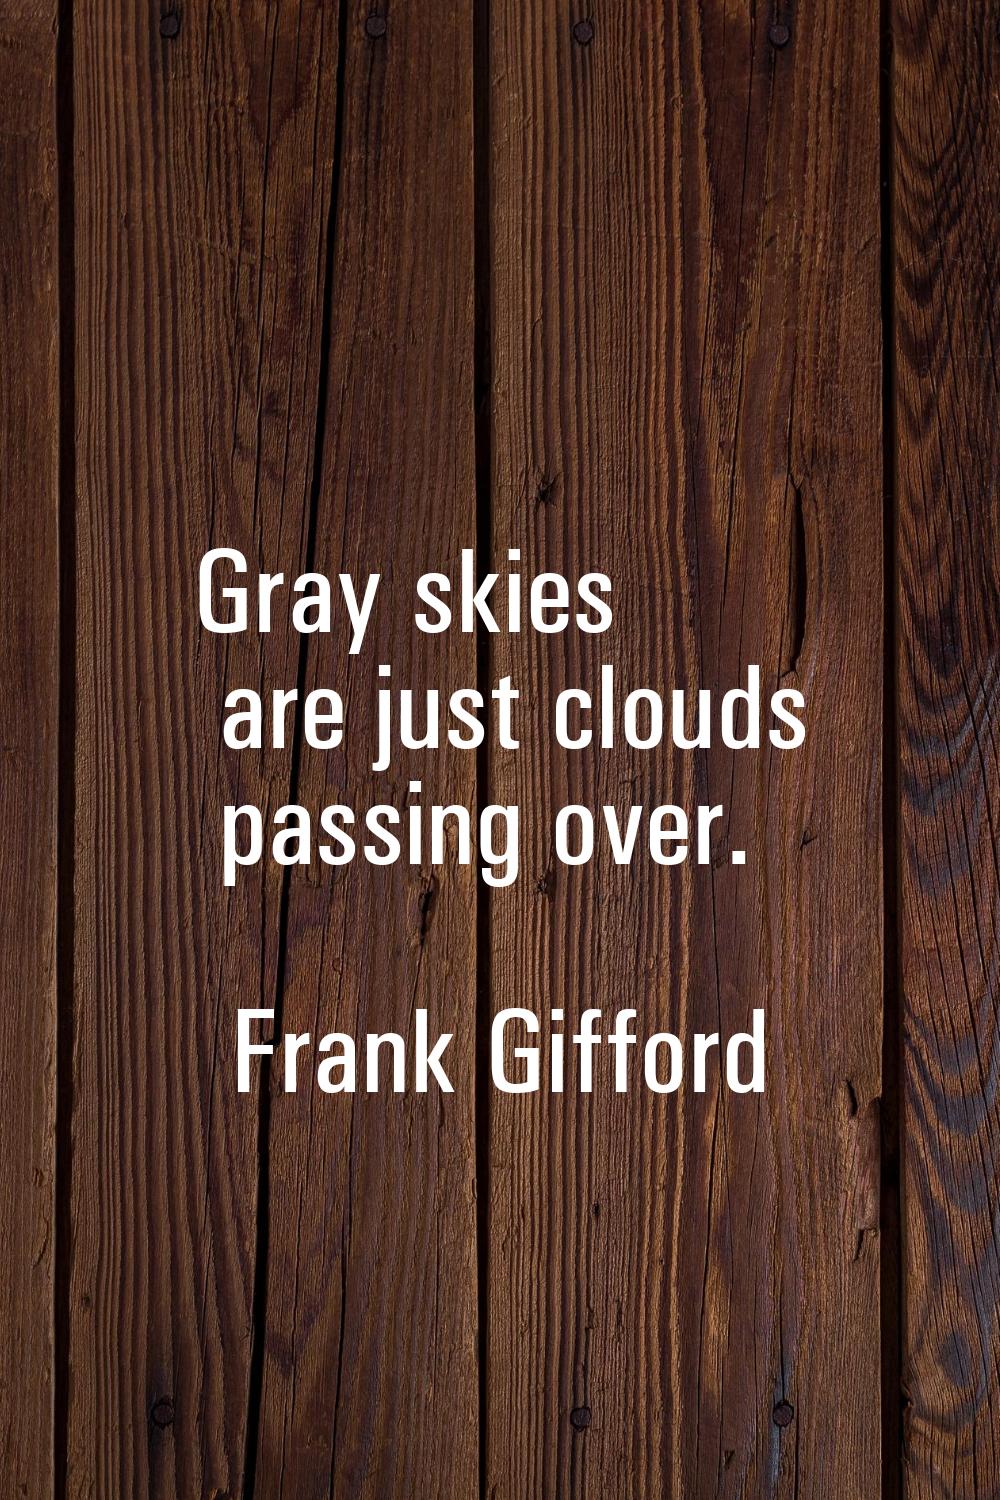 Gray skies are just clouds passing over.